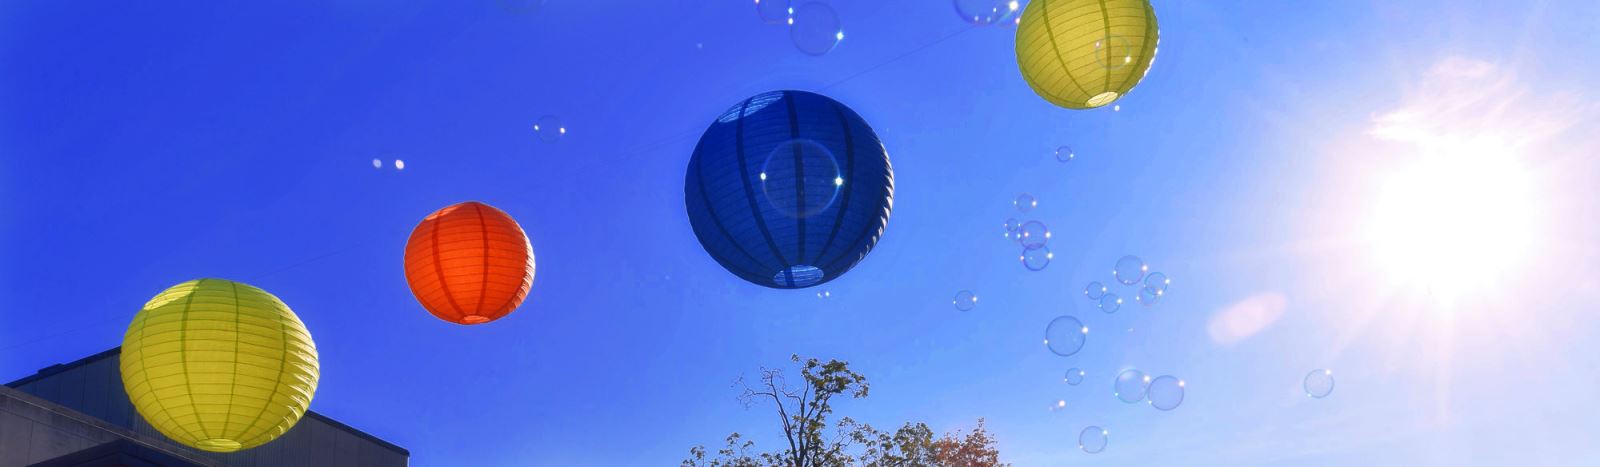 colorful paper lanterns and bubles against a blue sky